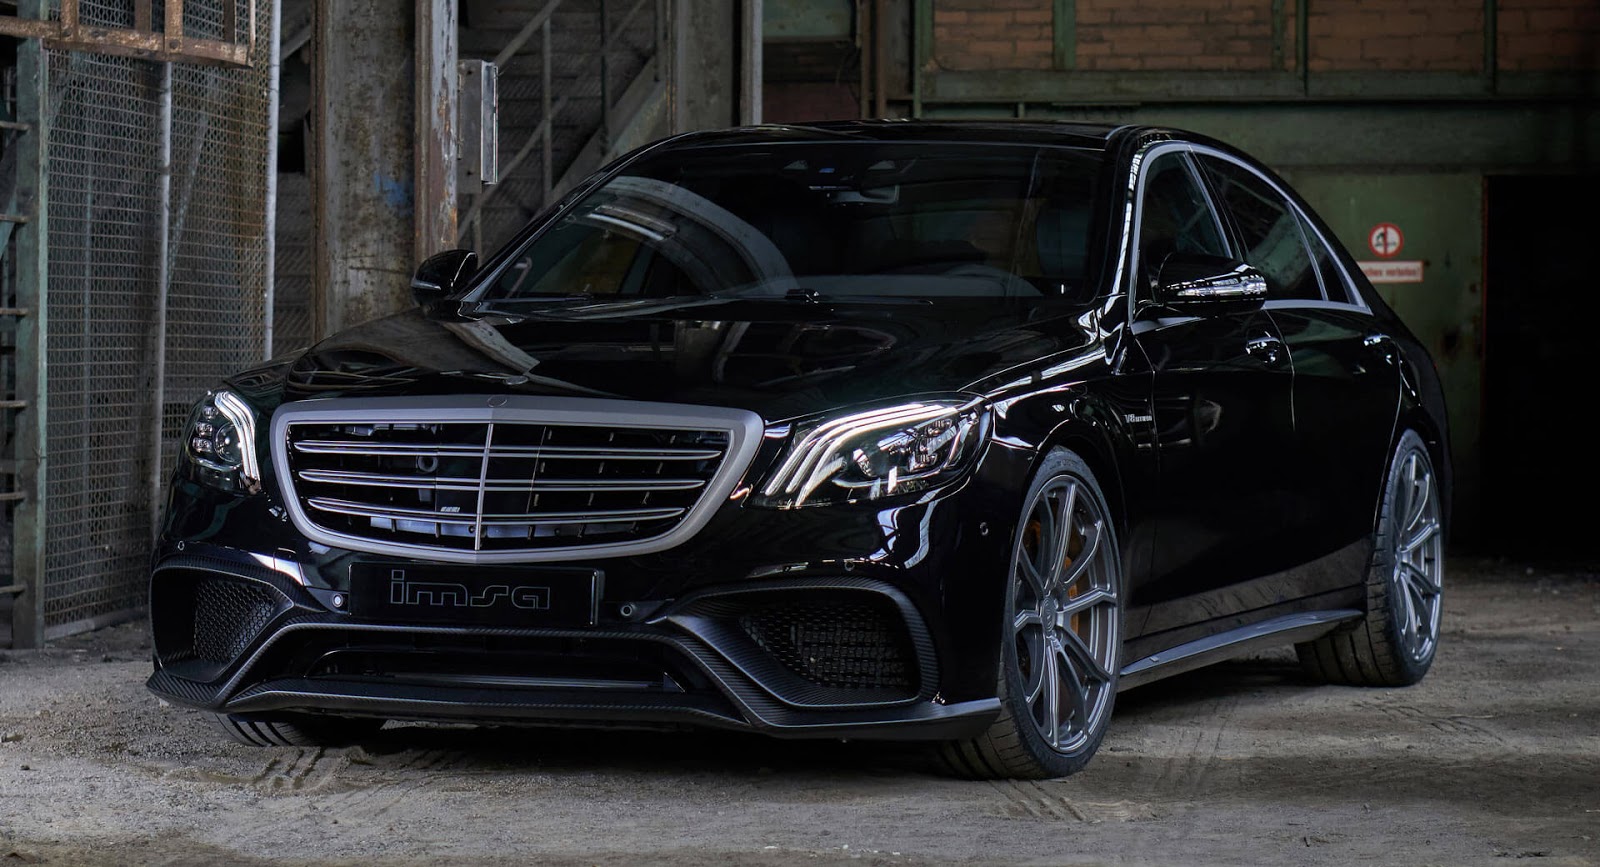 IMSA Gives 2018 Mercedes-AMG S63 720PS To Play With | Carscoops1600 x 867